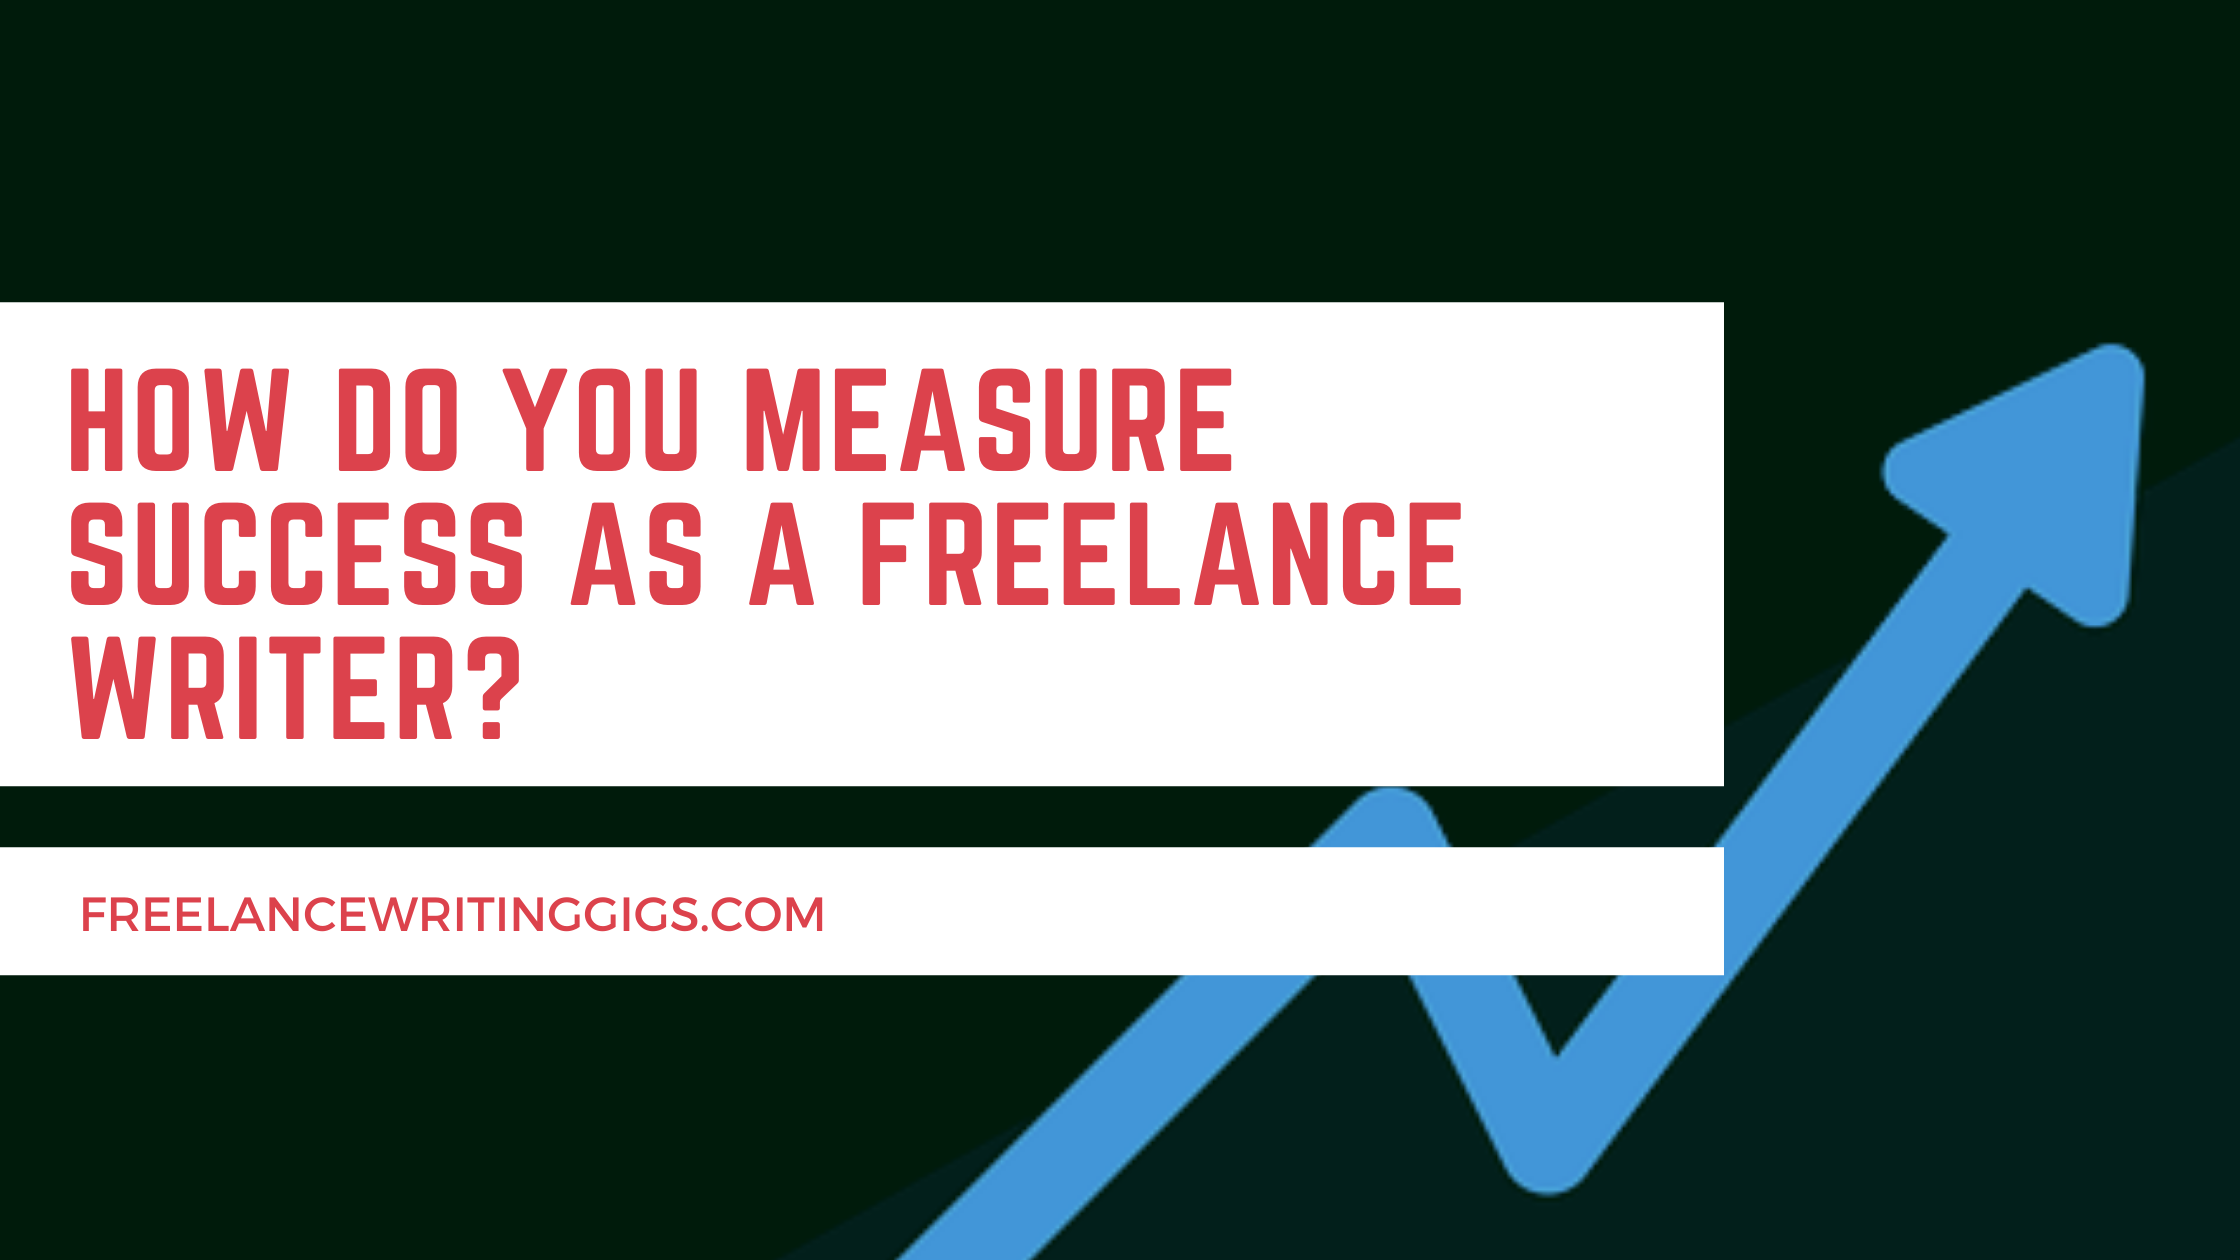 5 Necessary KPIs to Measure the Success of a Freelance Writer